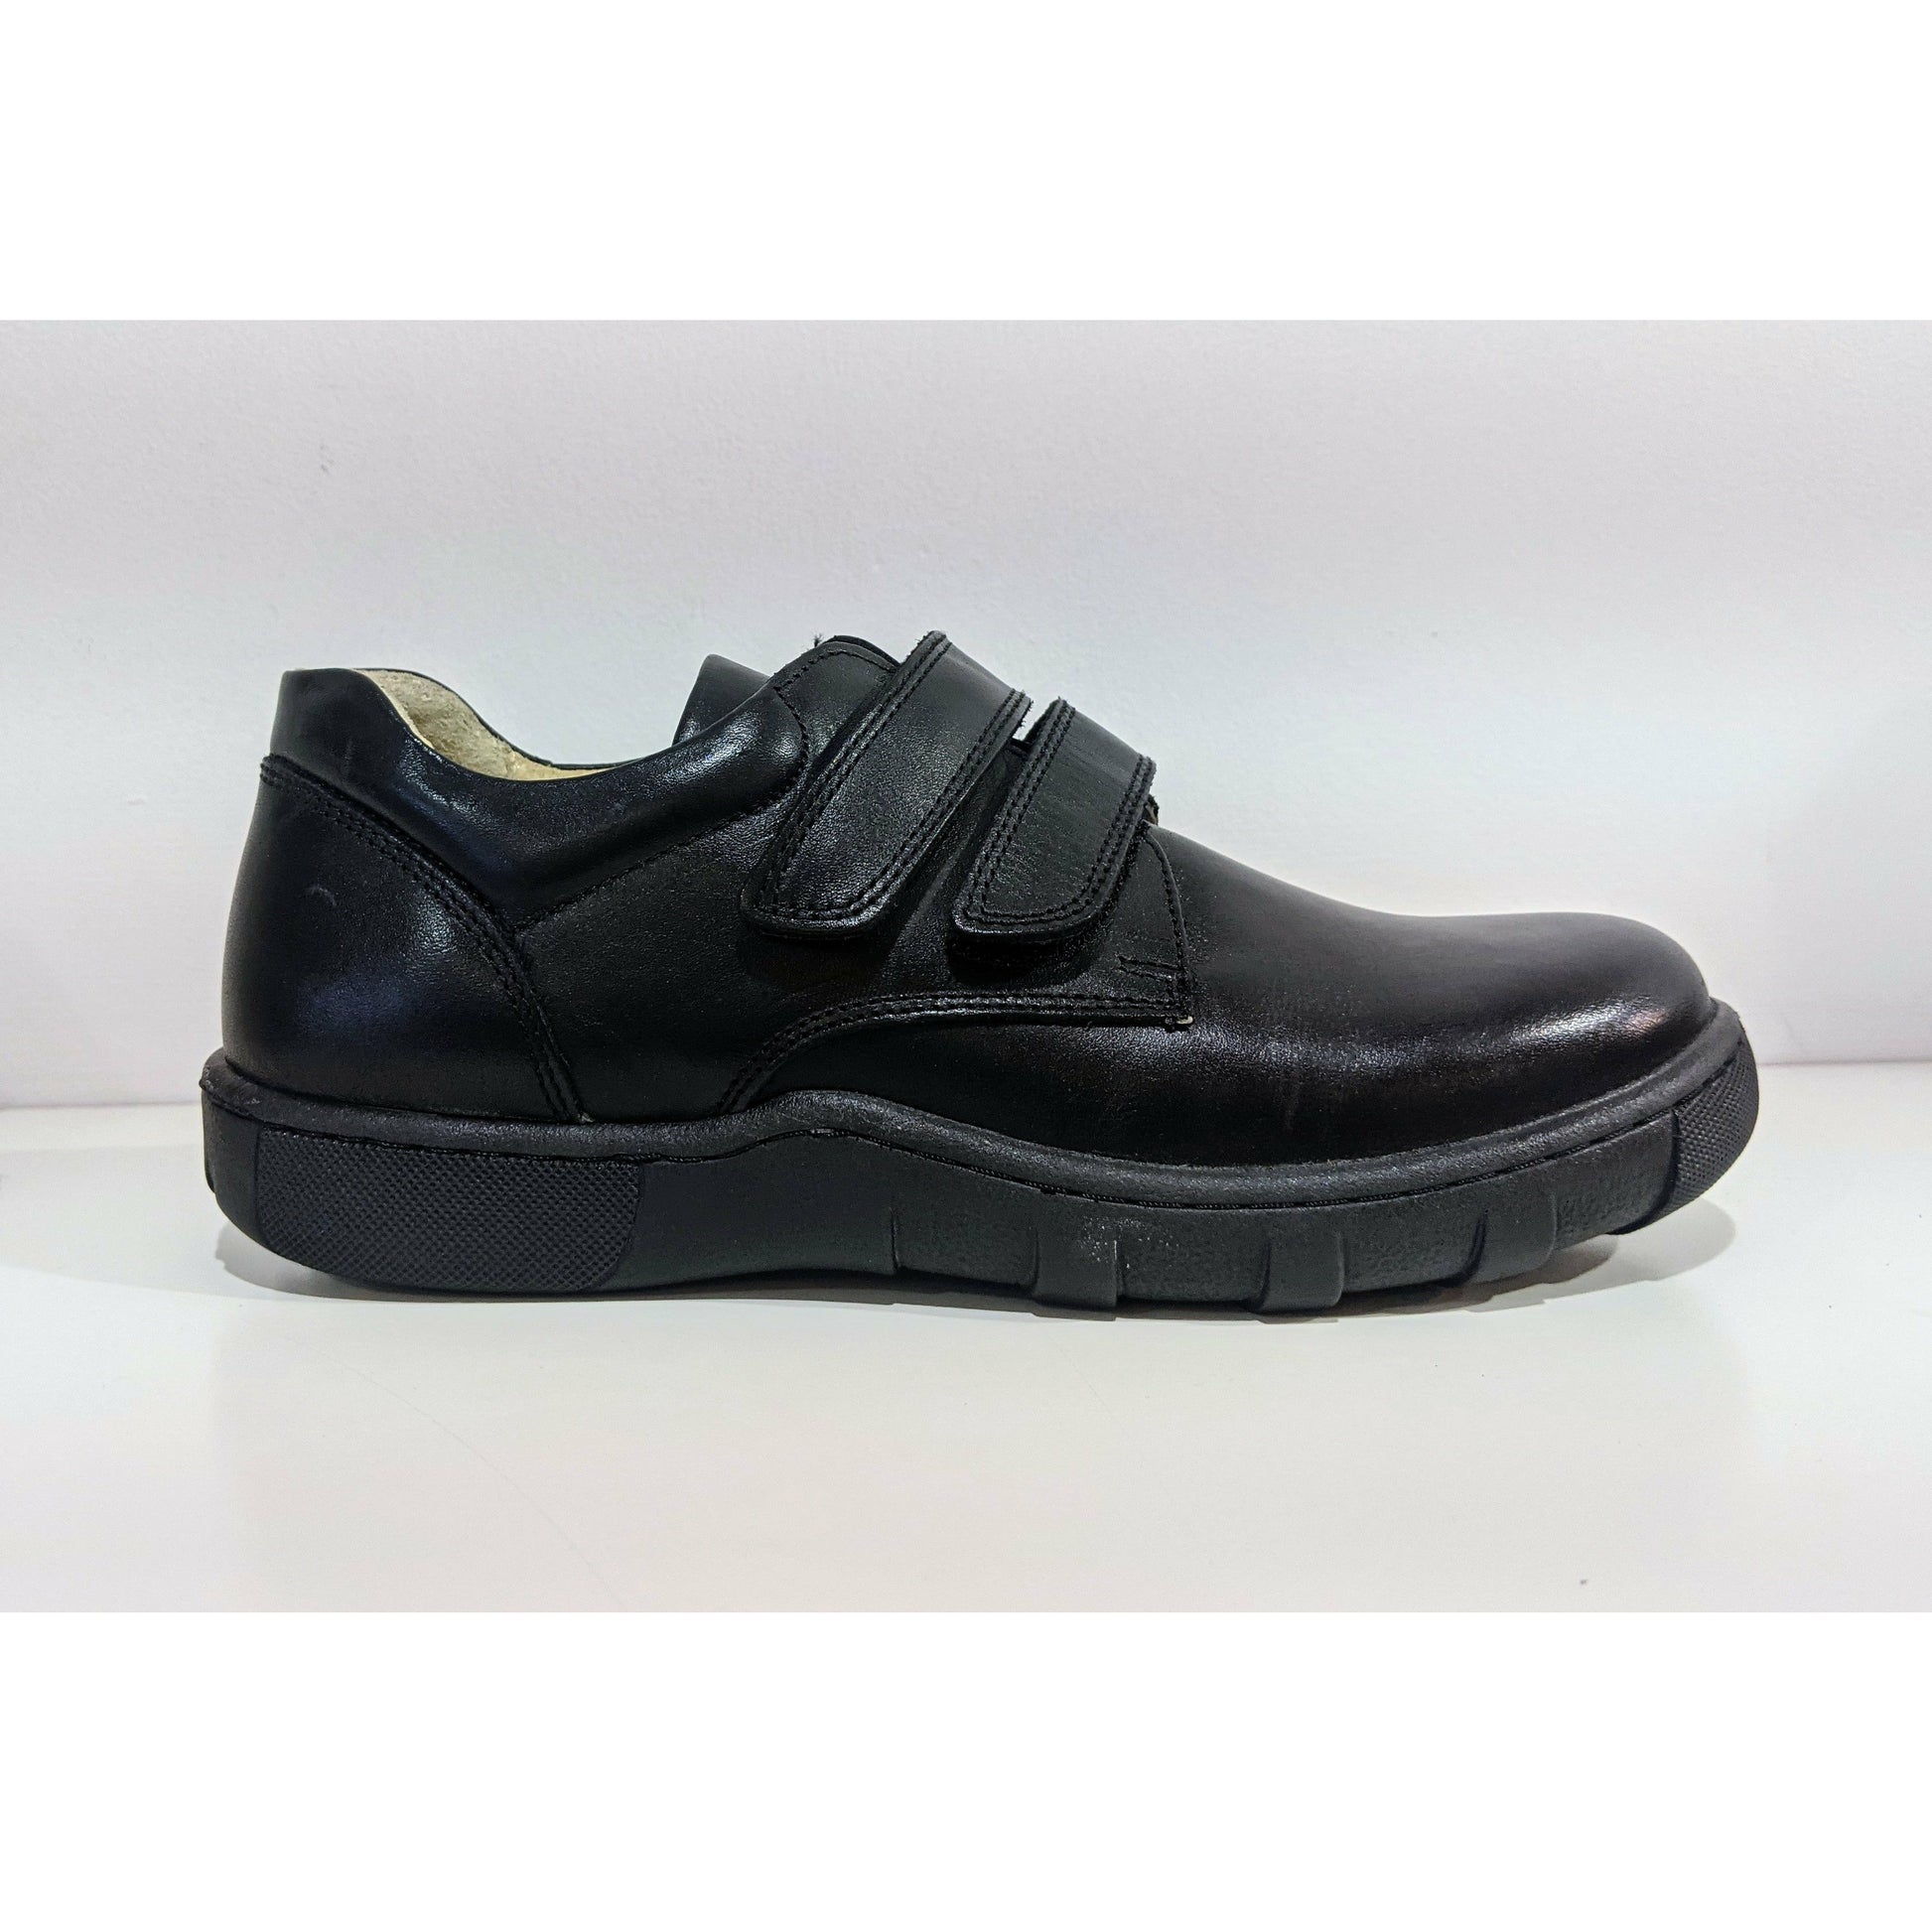 A boys smart school shoe by Petasil, style Patrick, in black with double velcro fastening. Right side view.